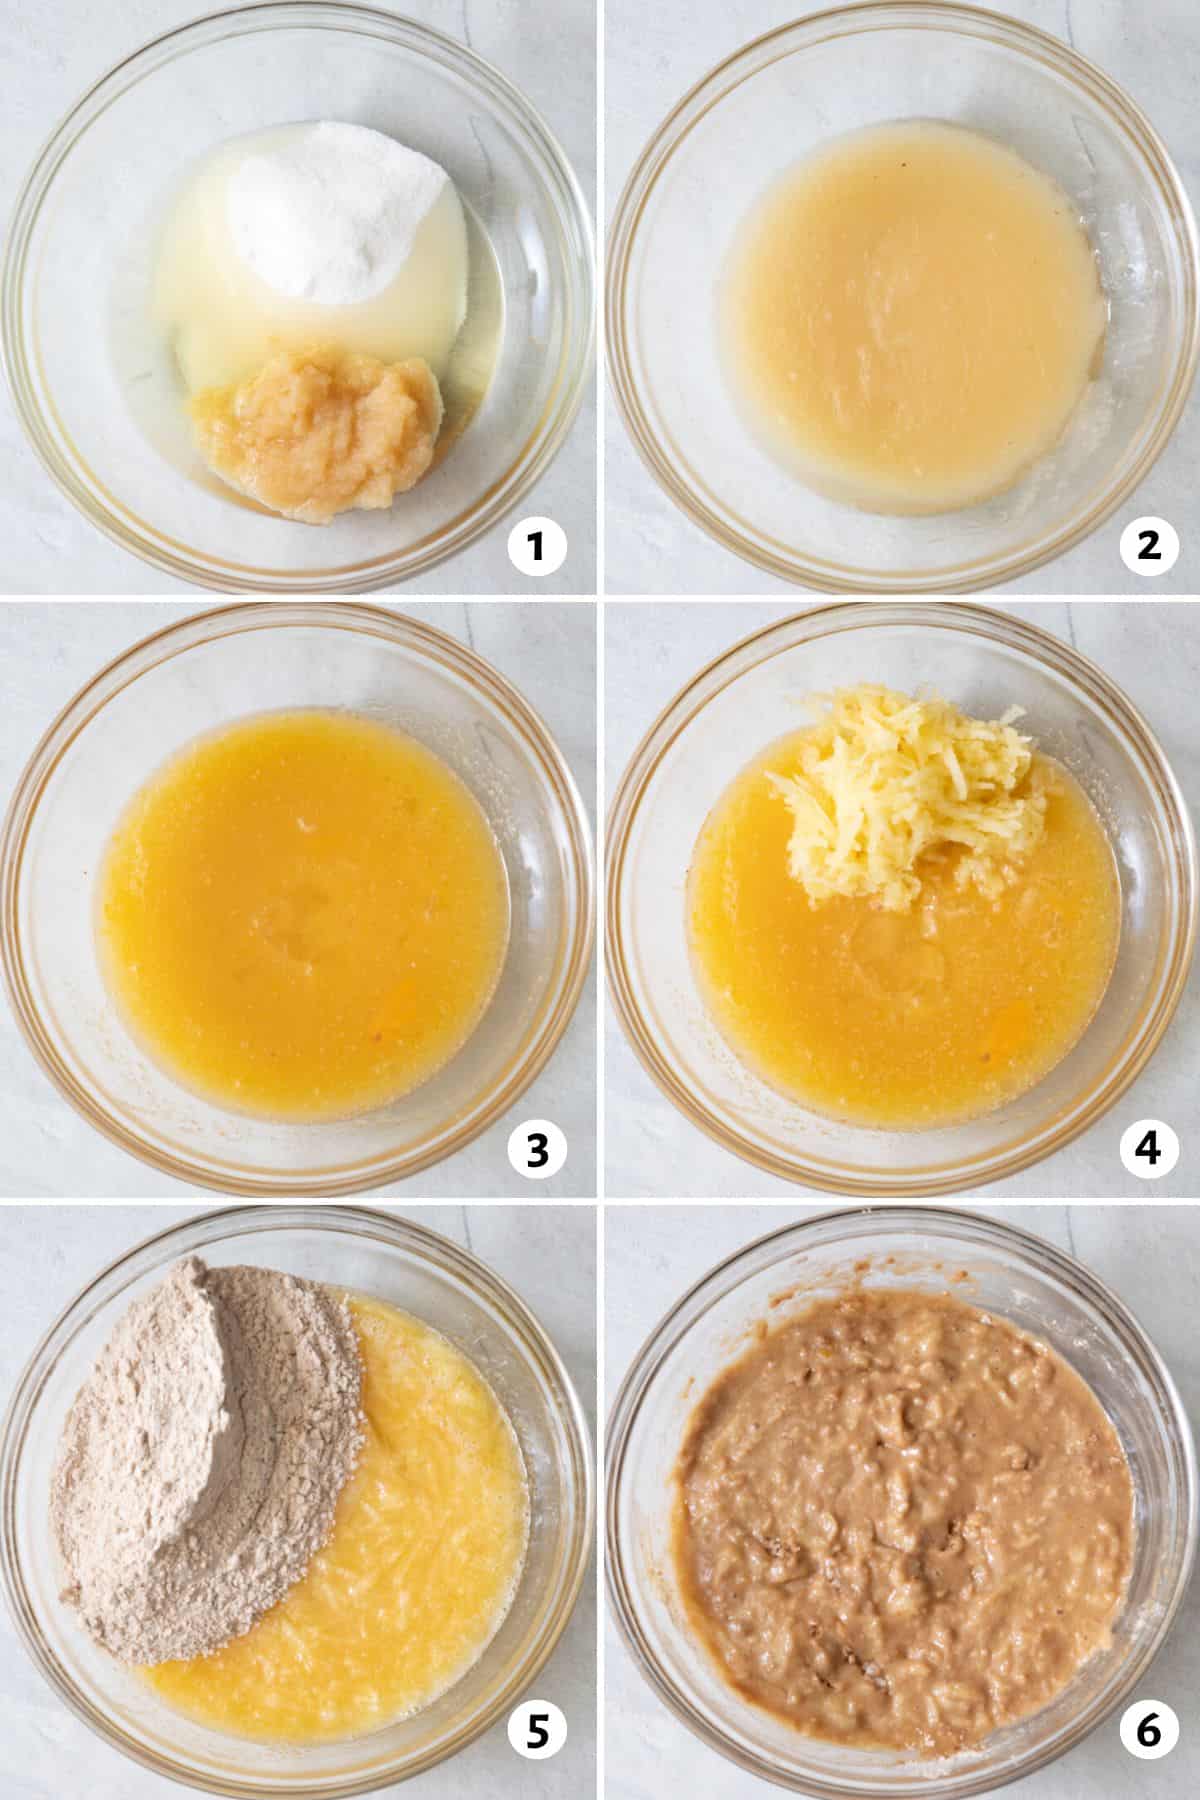 6 image collage on how to make recipe batter in bowl: sugar, applesauce and oil in bowl, then combined, eggs and vanilla mixed in, grated apple added, dry ingredients added, and batter completely combined.